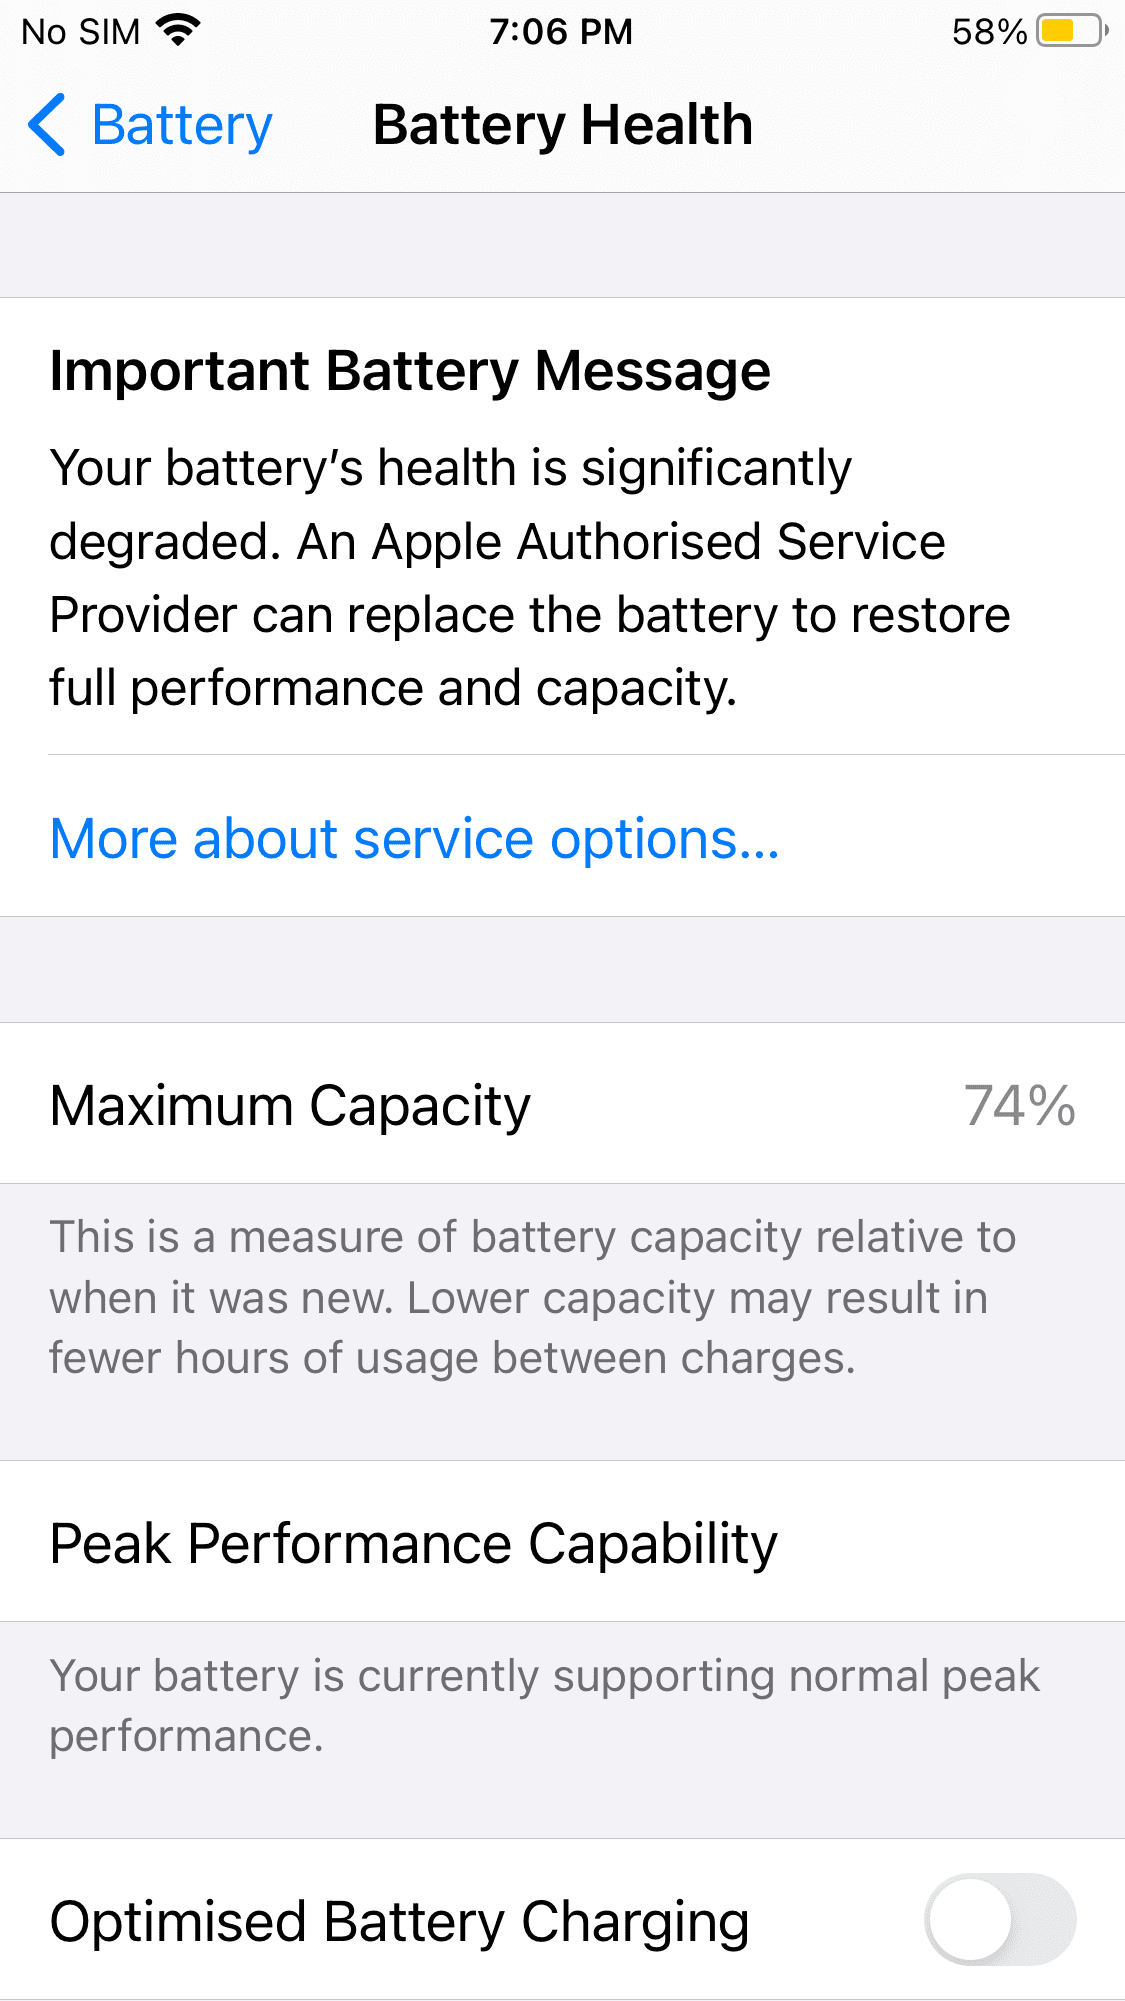 Important Battery Message regarding degraded battery health on iPhone